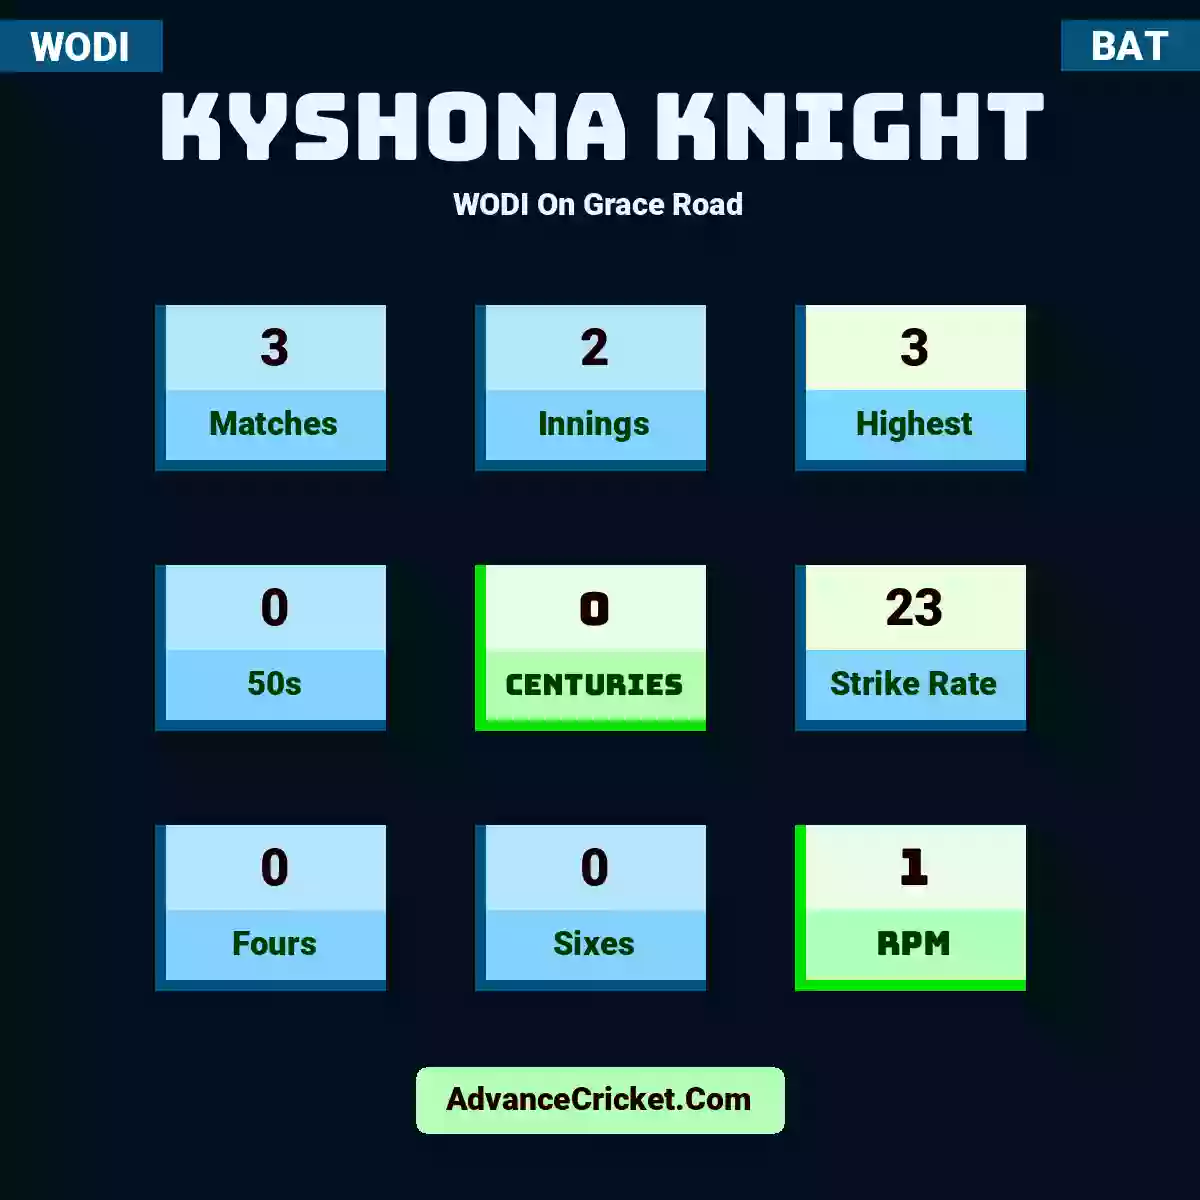 Kyshona Knight WODI  On Grace Road, Kyshona Knight played 3 matches, scored 3 runs as highest, 0 half-centuries, and 0 centuries, with a strike rate of 23. K.Knight hit 0 fours and 0 sixes, with an RPM of 1.